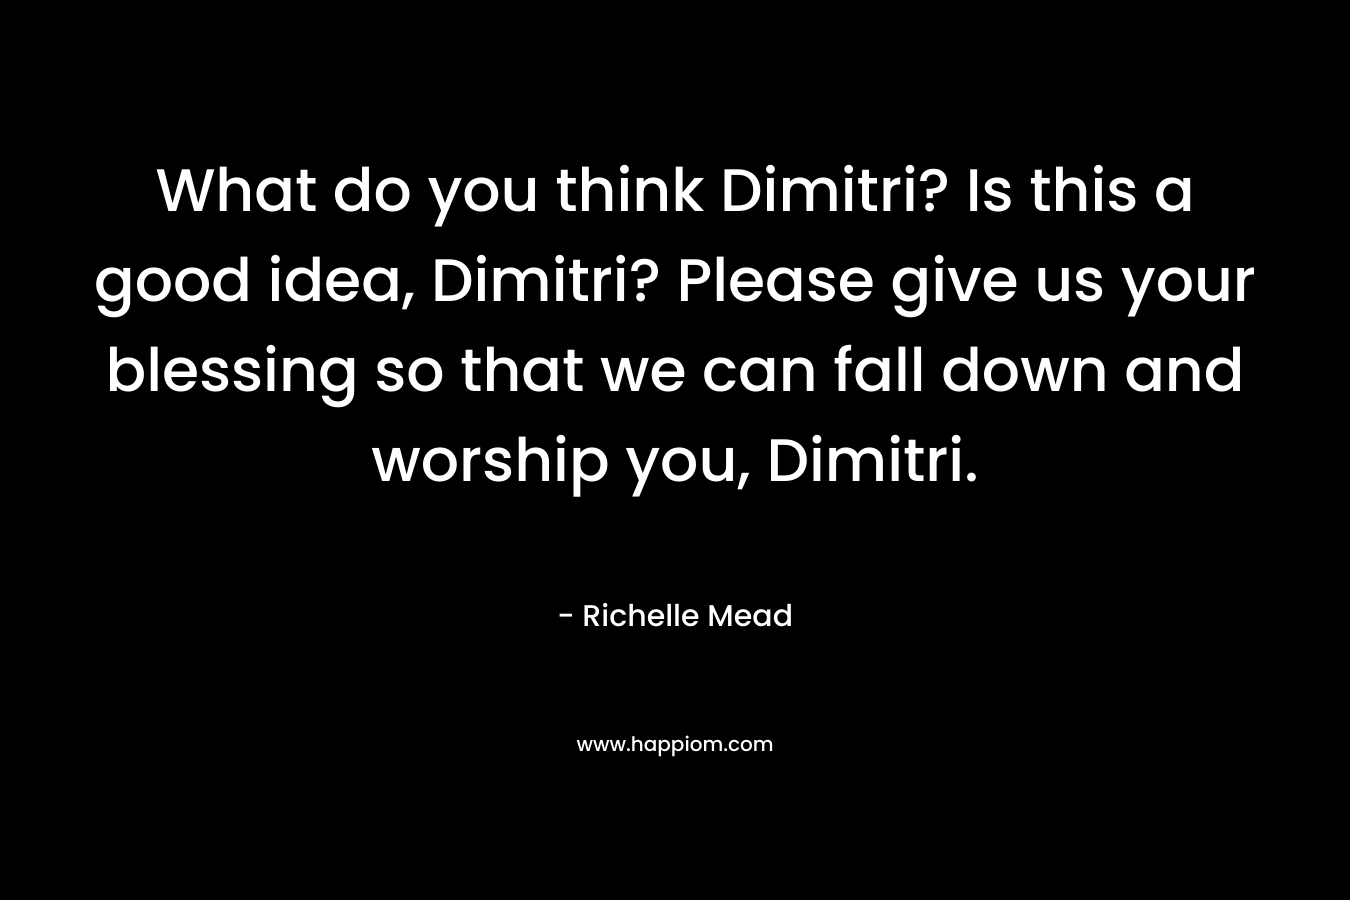 What do you think Dimitri? Is this a good idea, Dimitri? Please give us your blessing so that we can fall down and worship you, Dimitri.